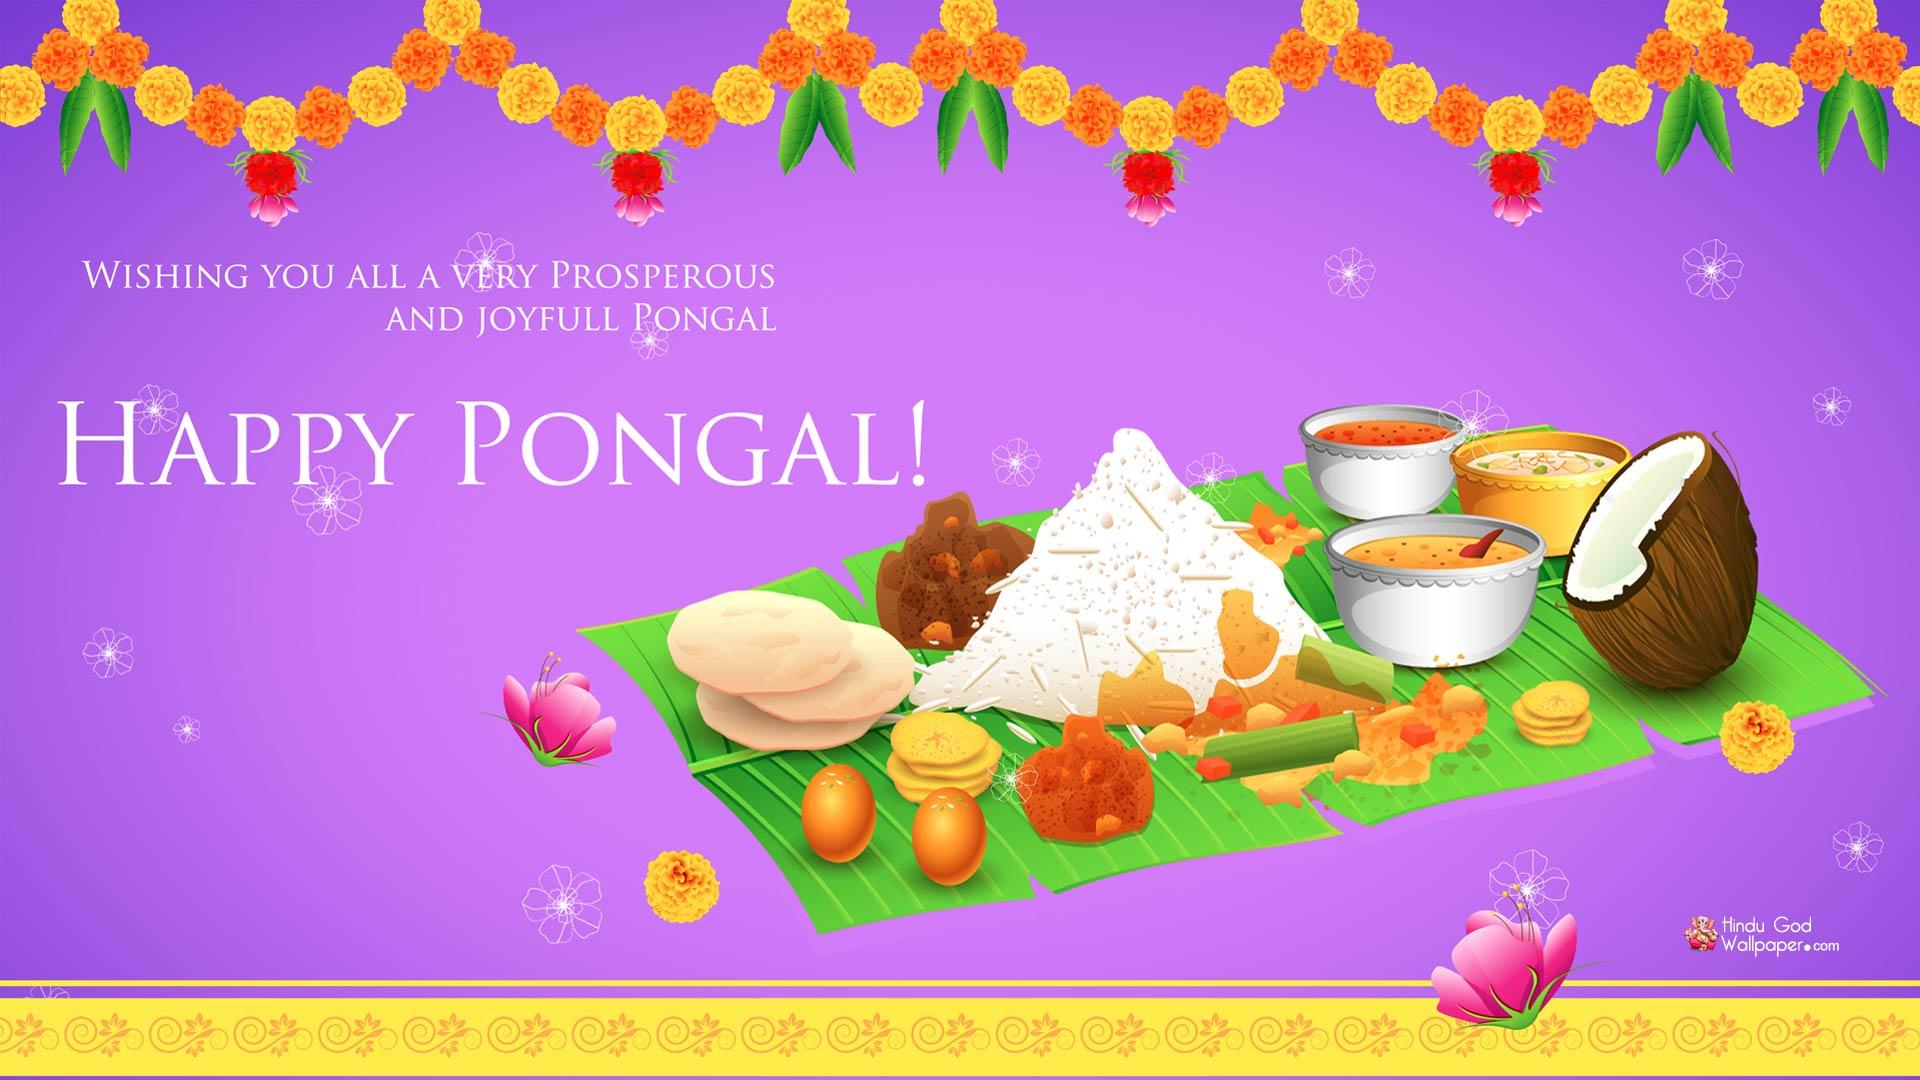 Pongal Wallpaper, HD Image, Picture & Photo Free Download